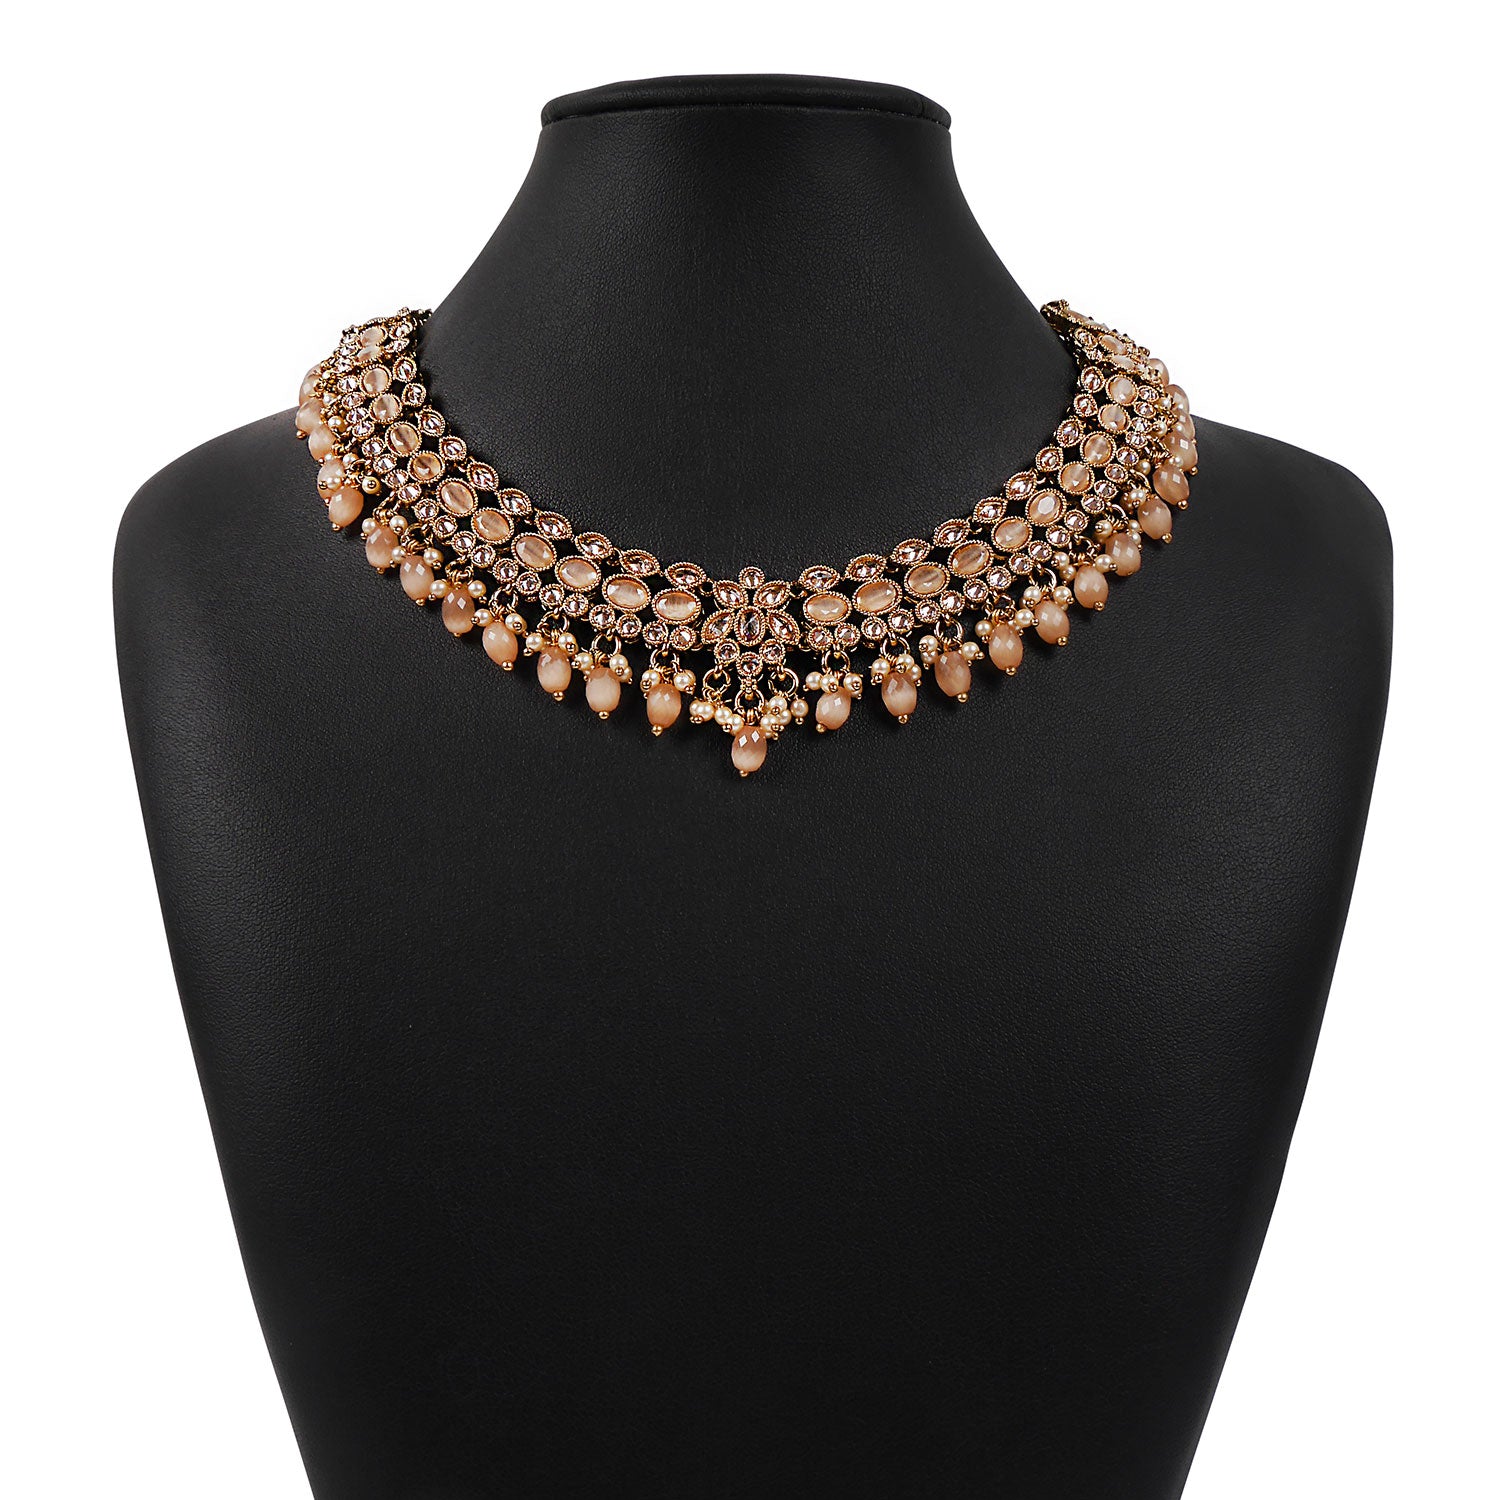 Aditi Necklace Set in Peach and Antique Gold